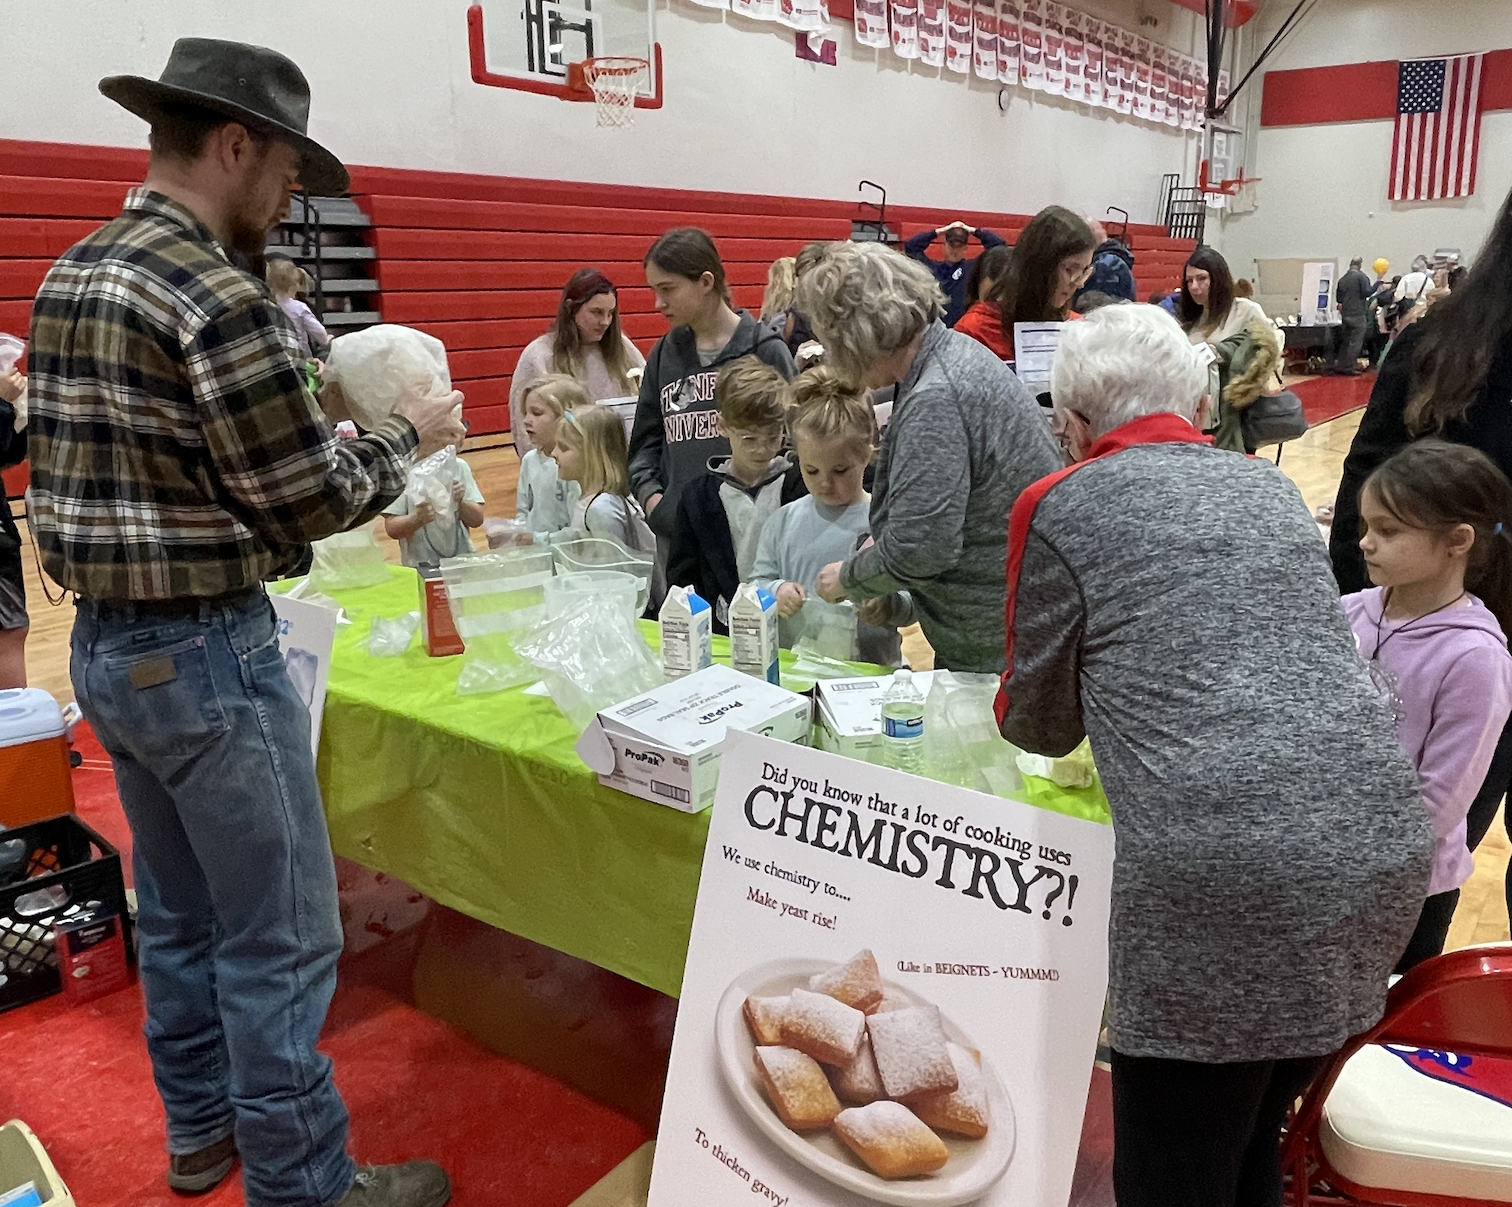 Students and their families take part in a hands-on chemistry experiment provided  by the Beans & Beignets restaurant, among other STEM exhibits, at the ﻿Earlham Family STEM Festival.